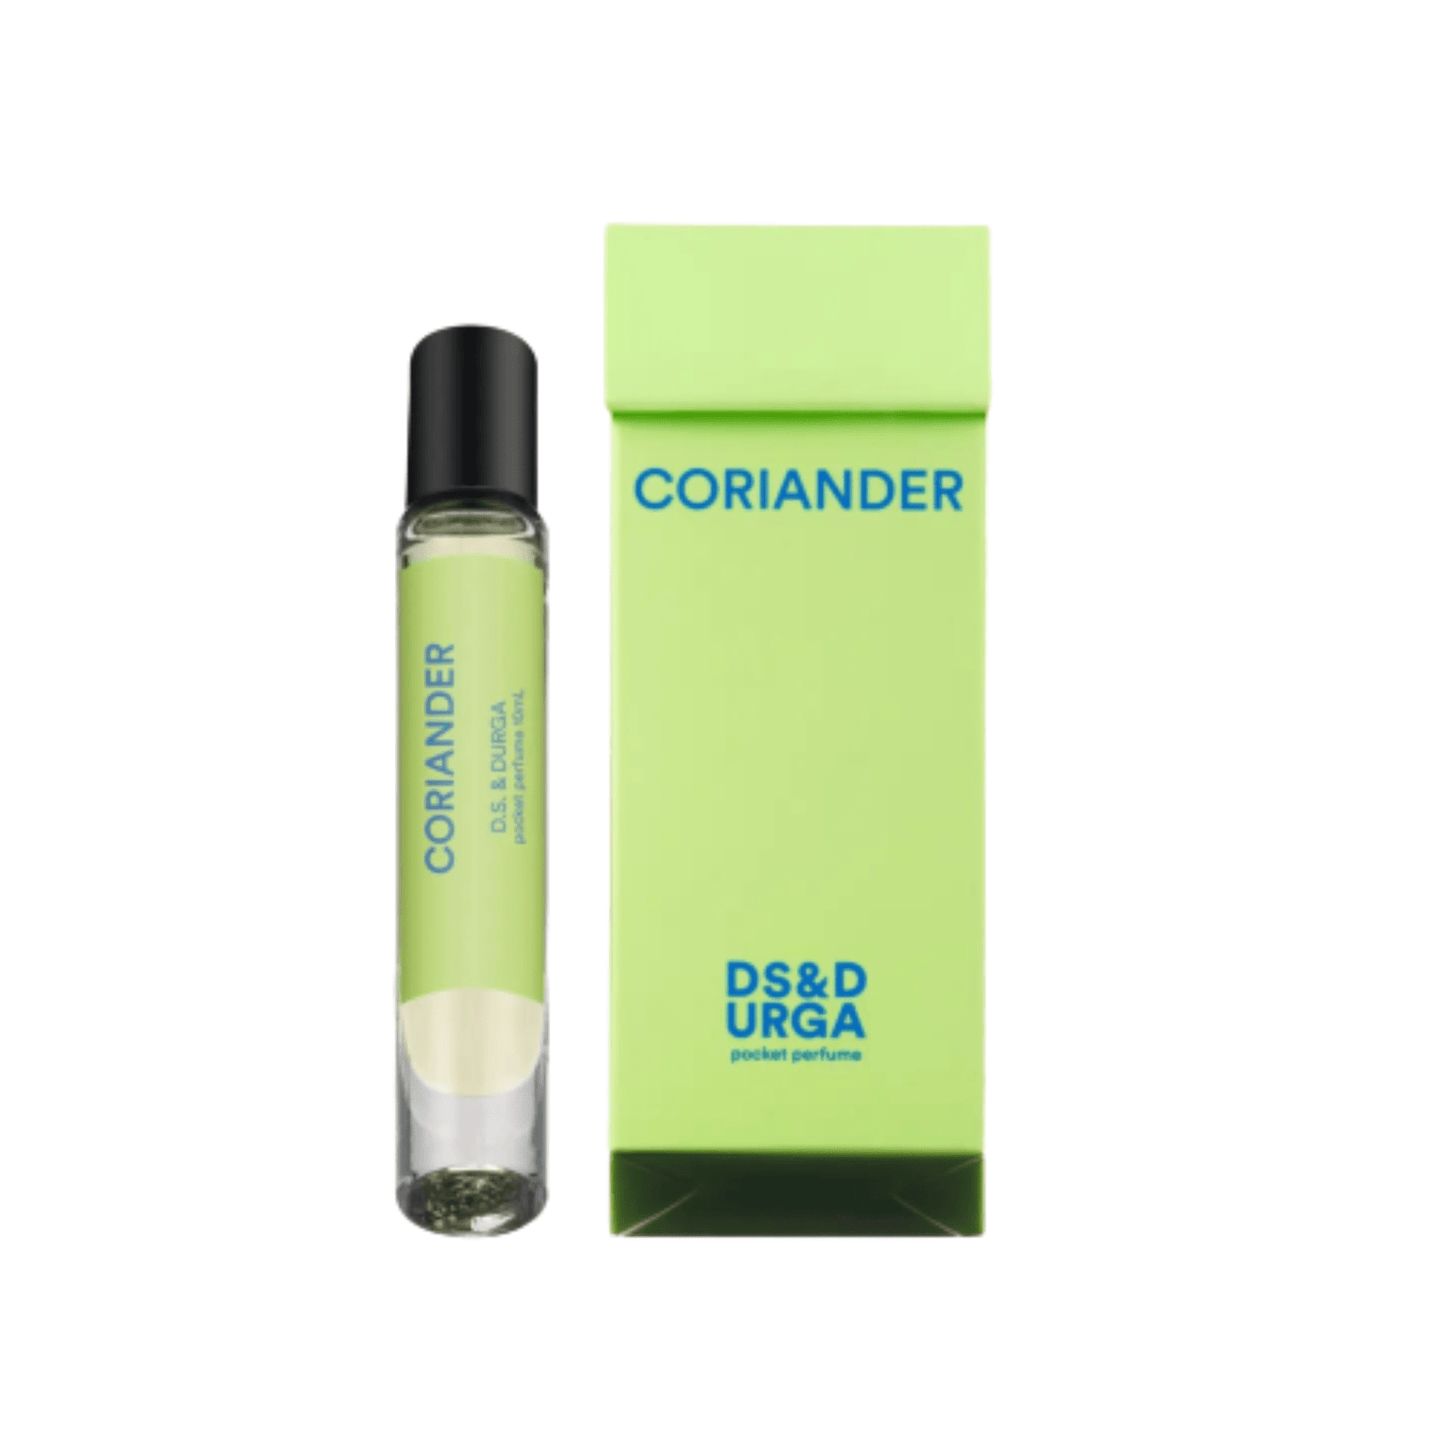 Primary Image of Pocket Perfume - Coriander Roll-On Oil